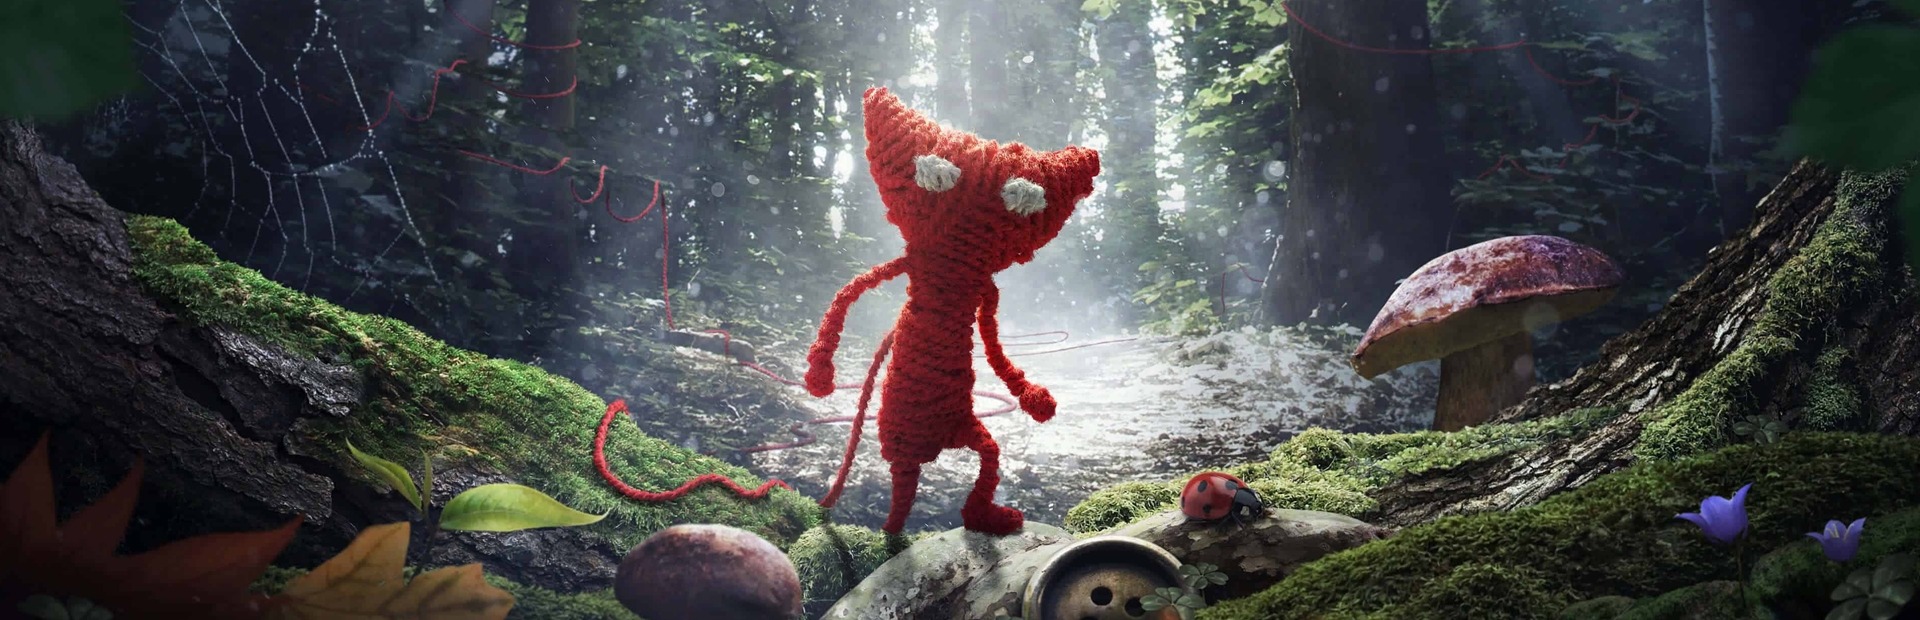 Rumour: Unravel bundle released next month - Unravel Two - Gamereactor